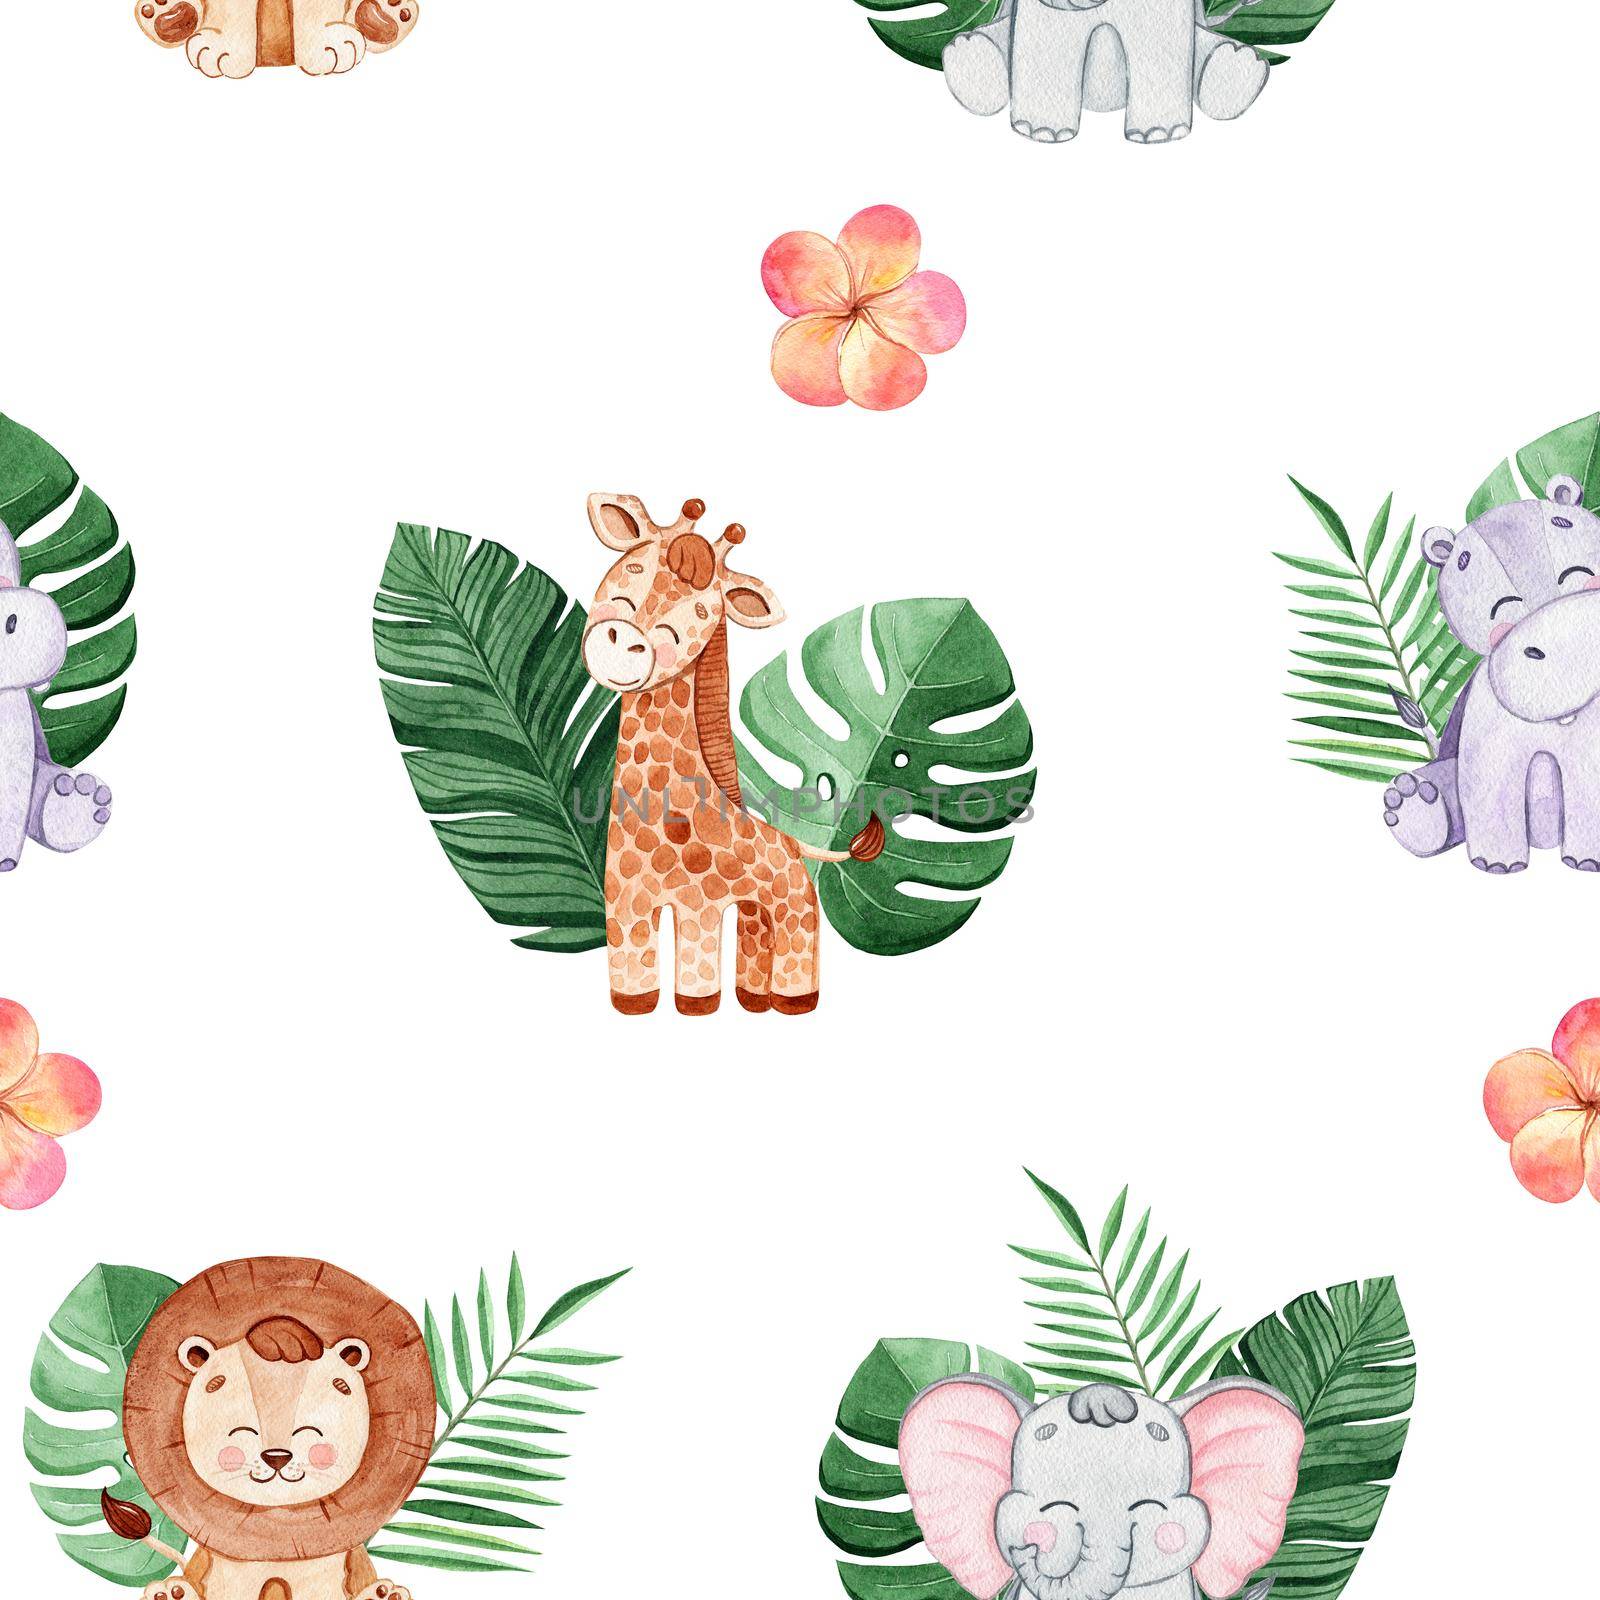 watercolor wild african animals and green tropical palm leaves and plumeria flowers seamless pattern on white background for baby fabric,textile,pajamas,branding,invitations,scrapbooking,wrapping by dreamloud